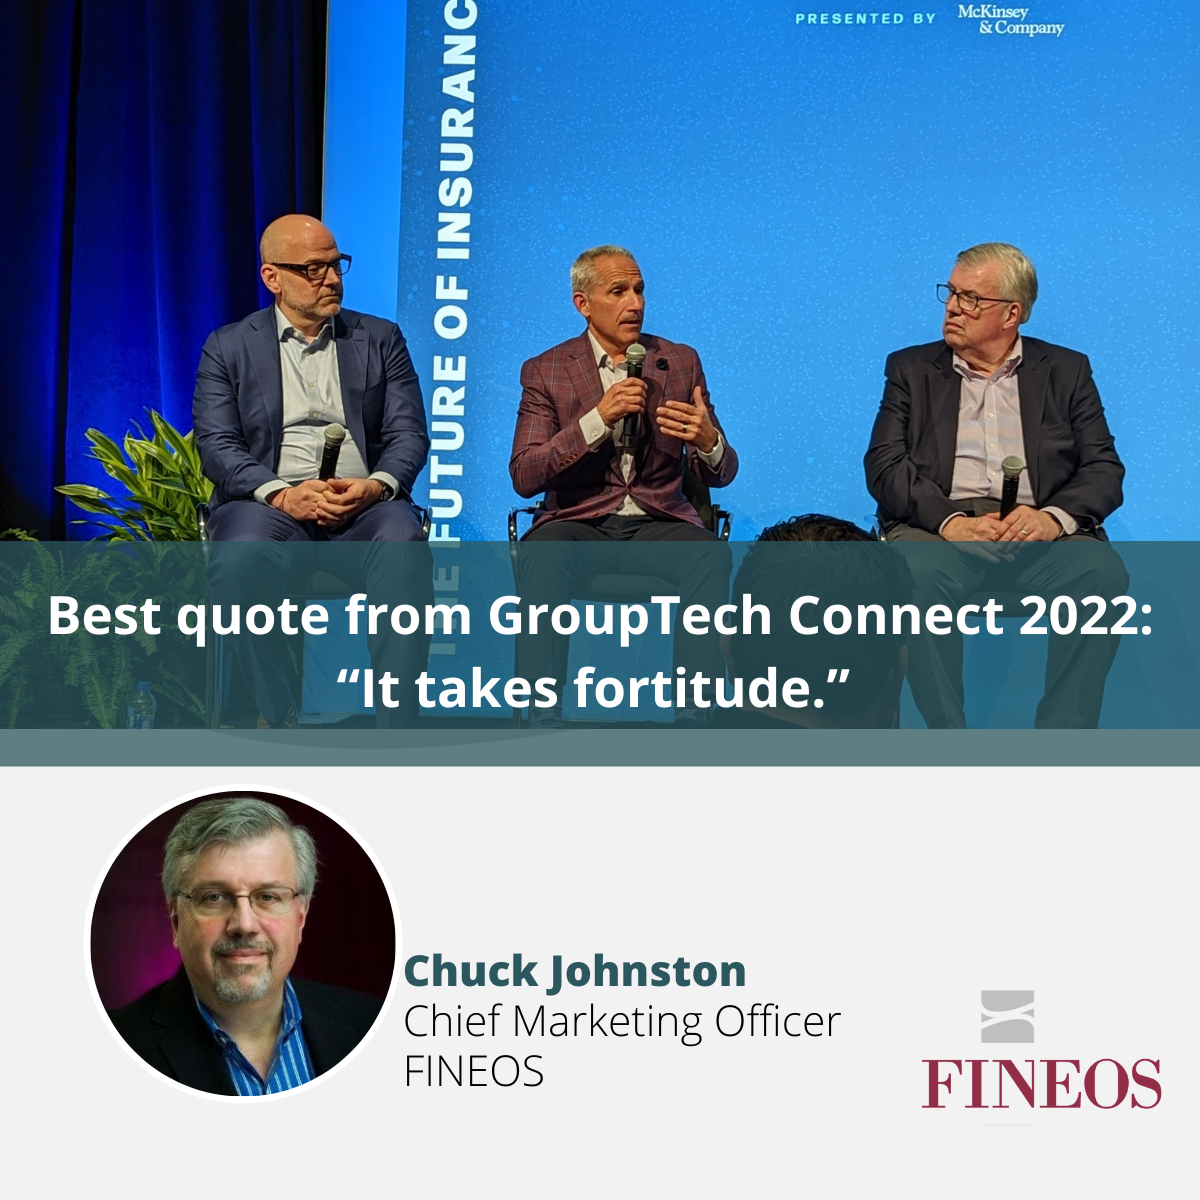 Best quote from GroupTech Connect 2022: “It takes fortitude.”